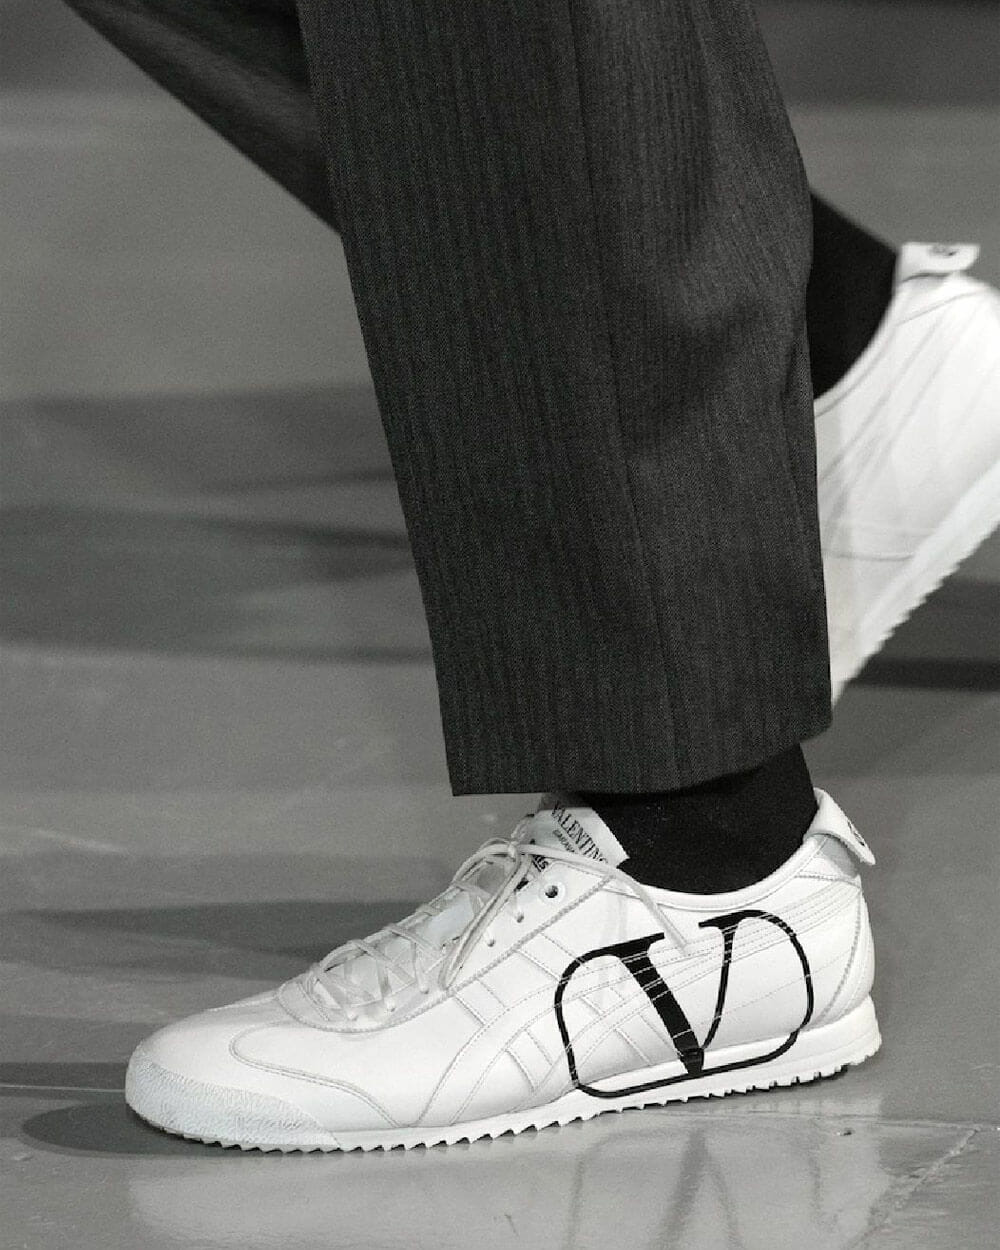 Valentino sneaker collaboration with Onitsuka Tiger